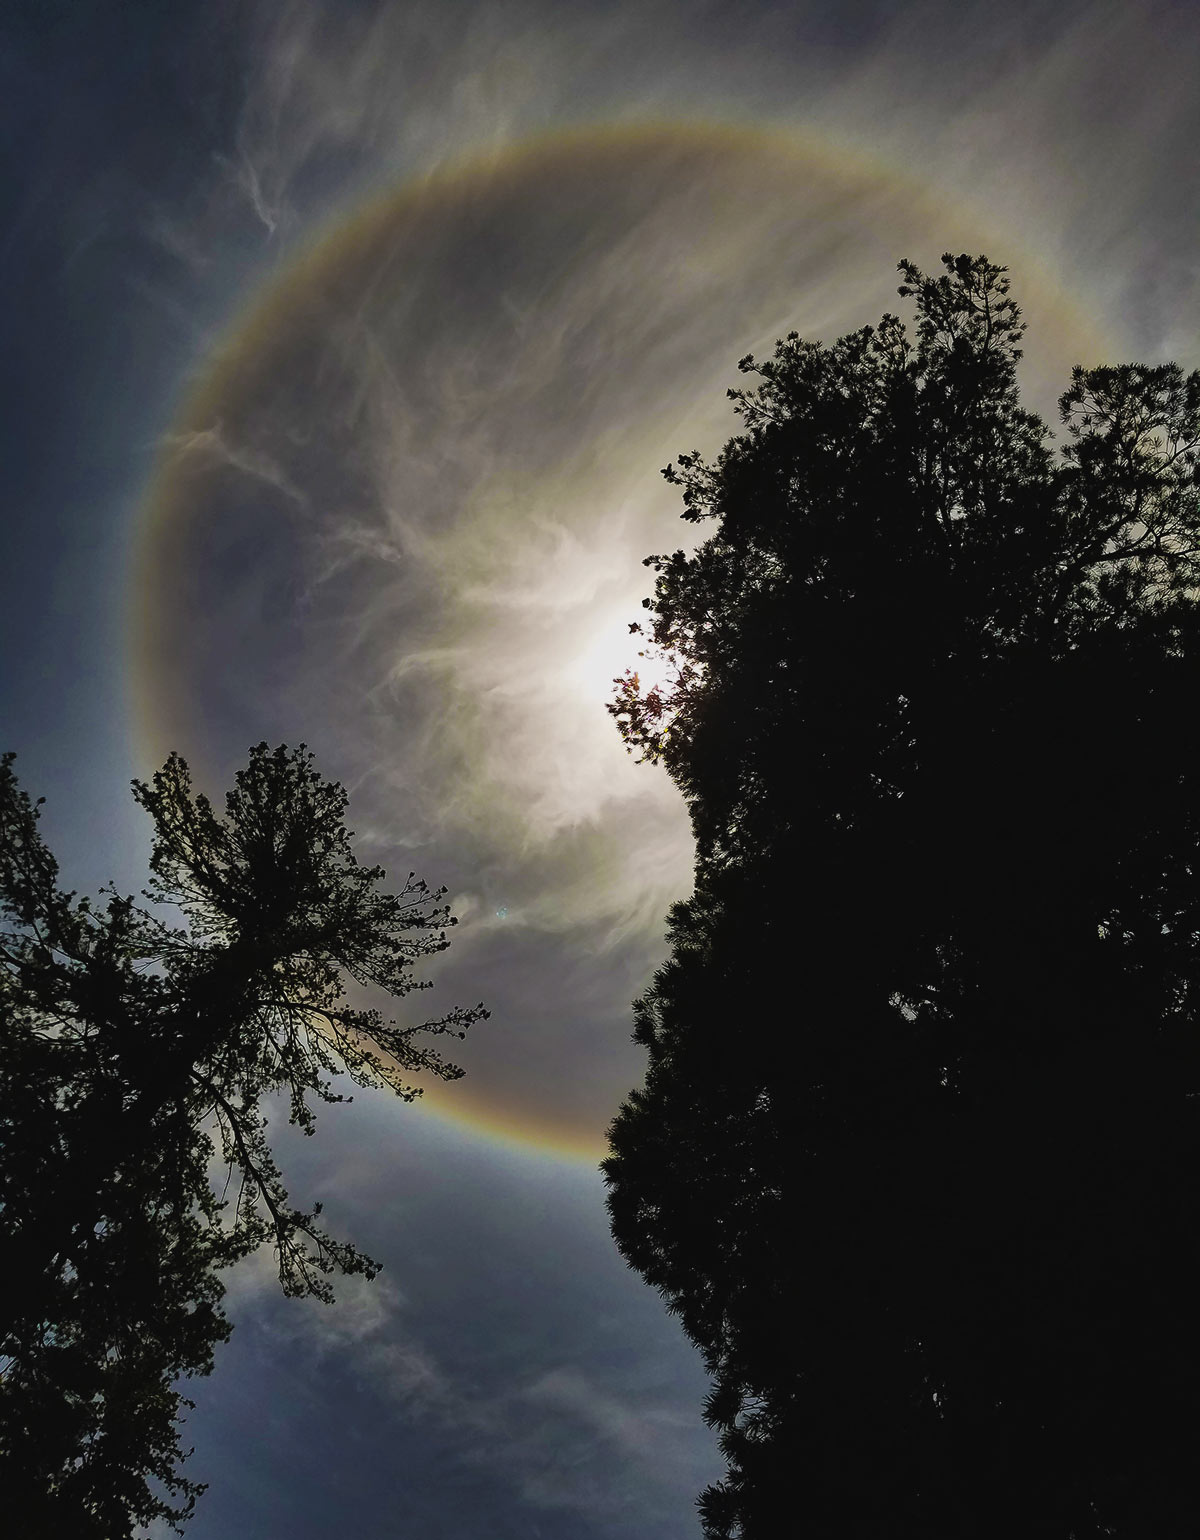 Rainbow halo around the sun and silhoutted trees